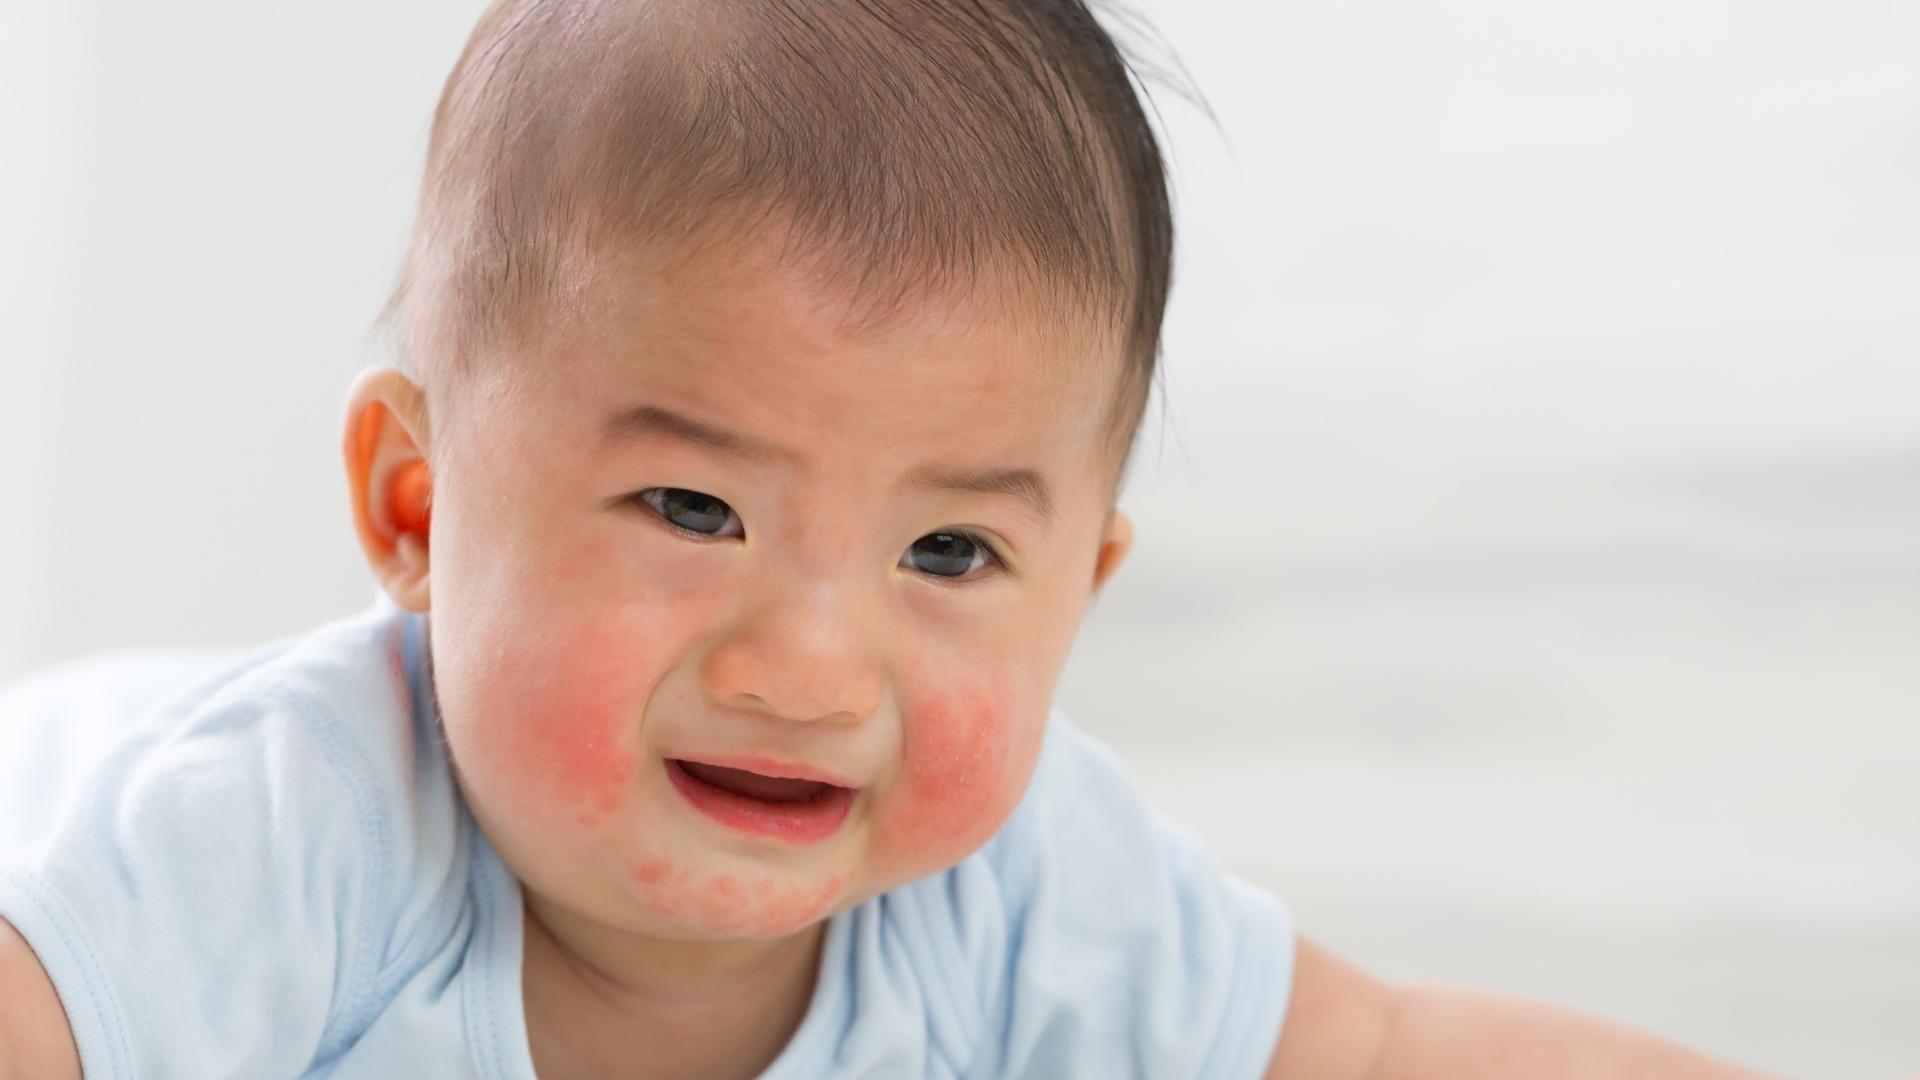 Teething Rash: Causes, Symptoms, Pictures, 7 Top Treatments